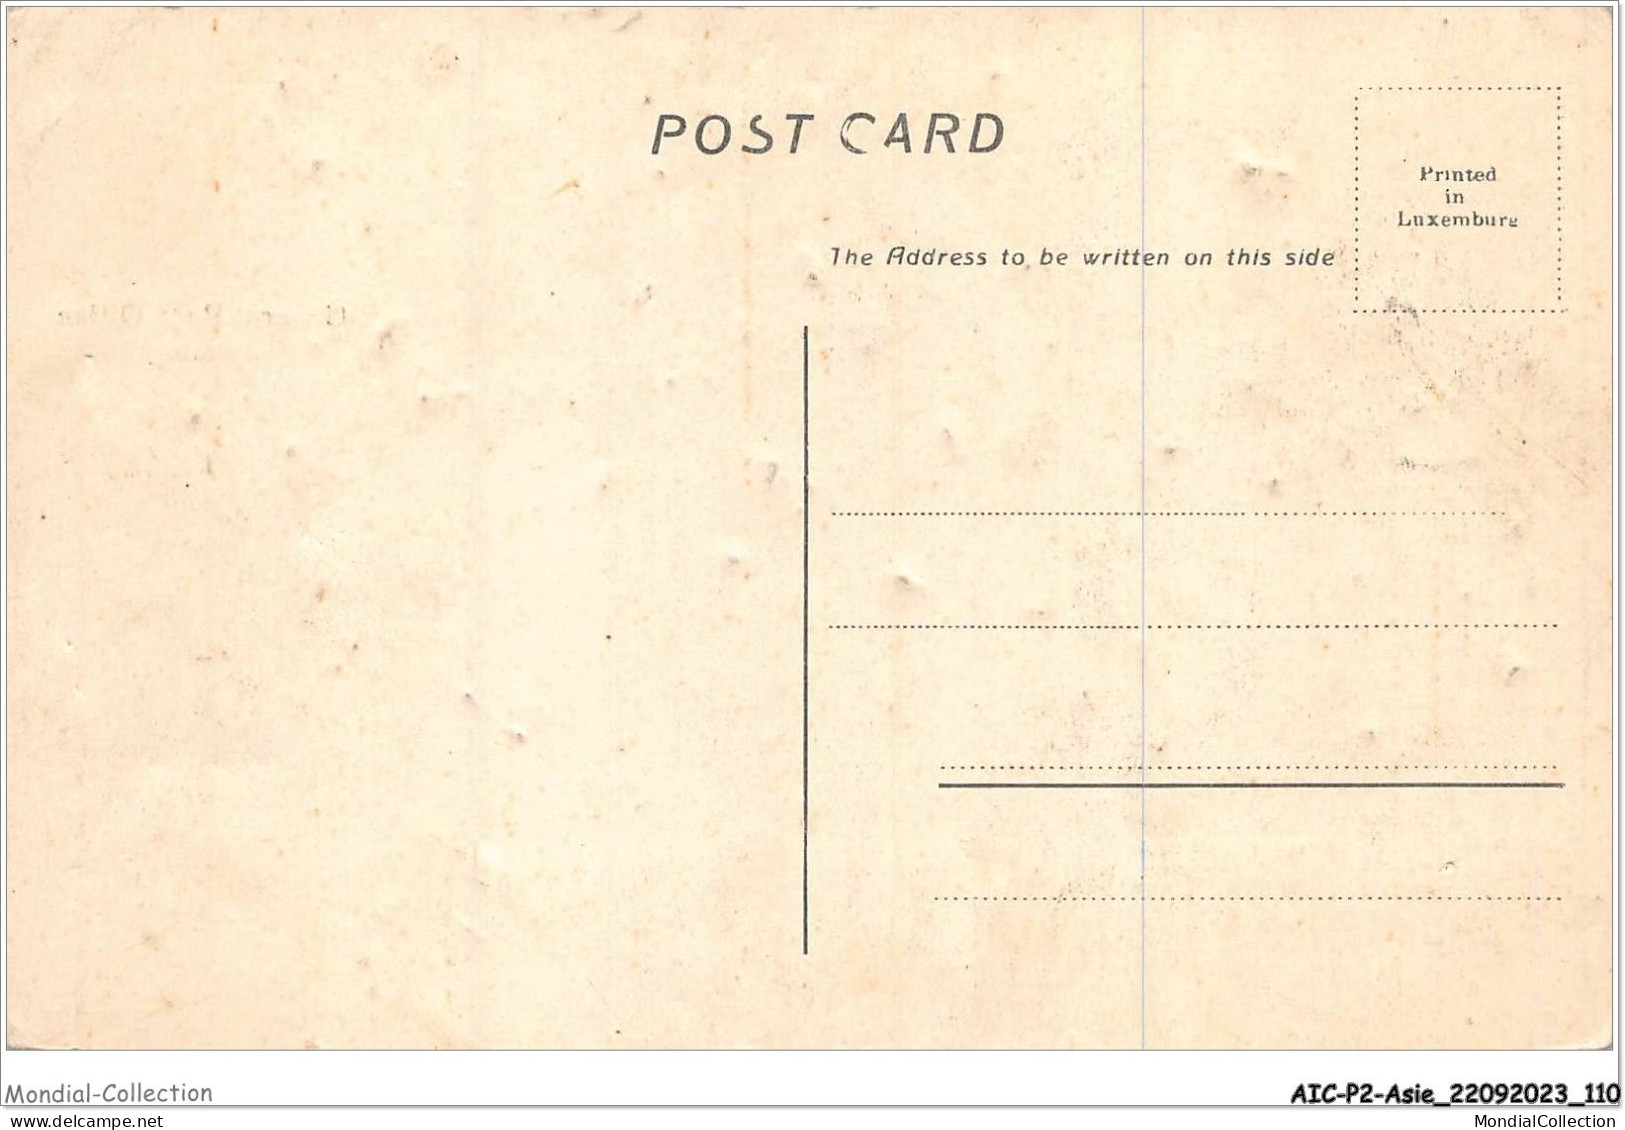 AICP2-ASIE-0177 - General Post Office - BOMBAY - Inde